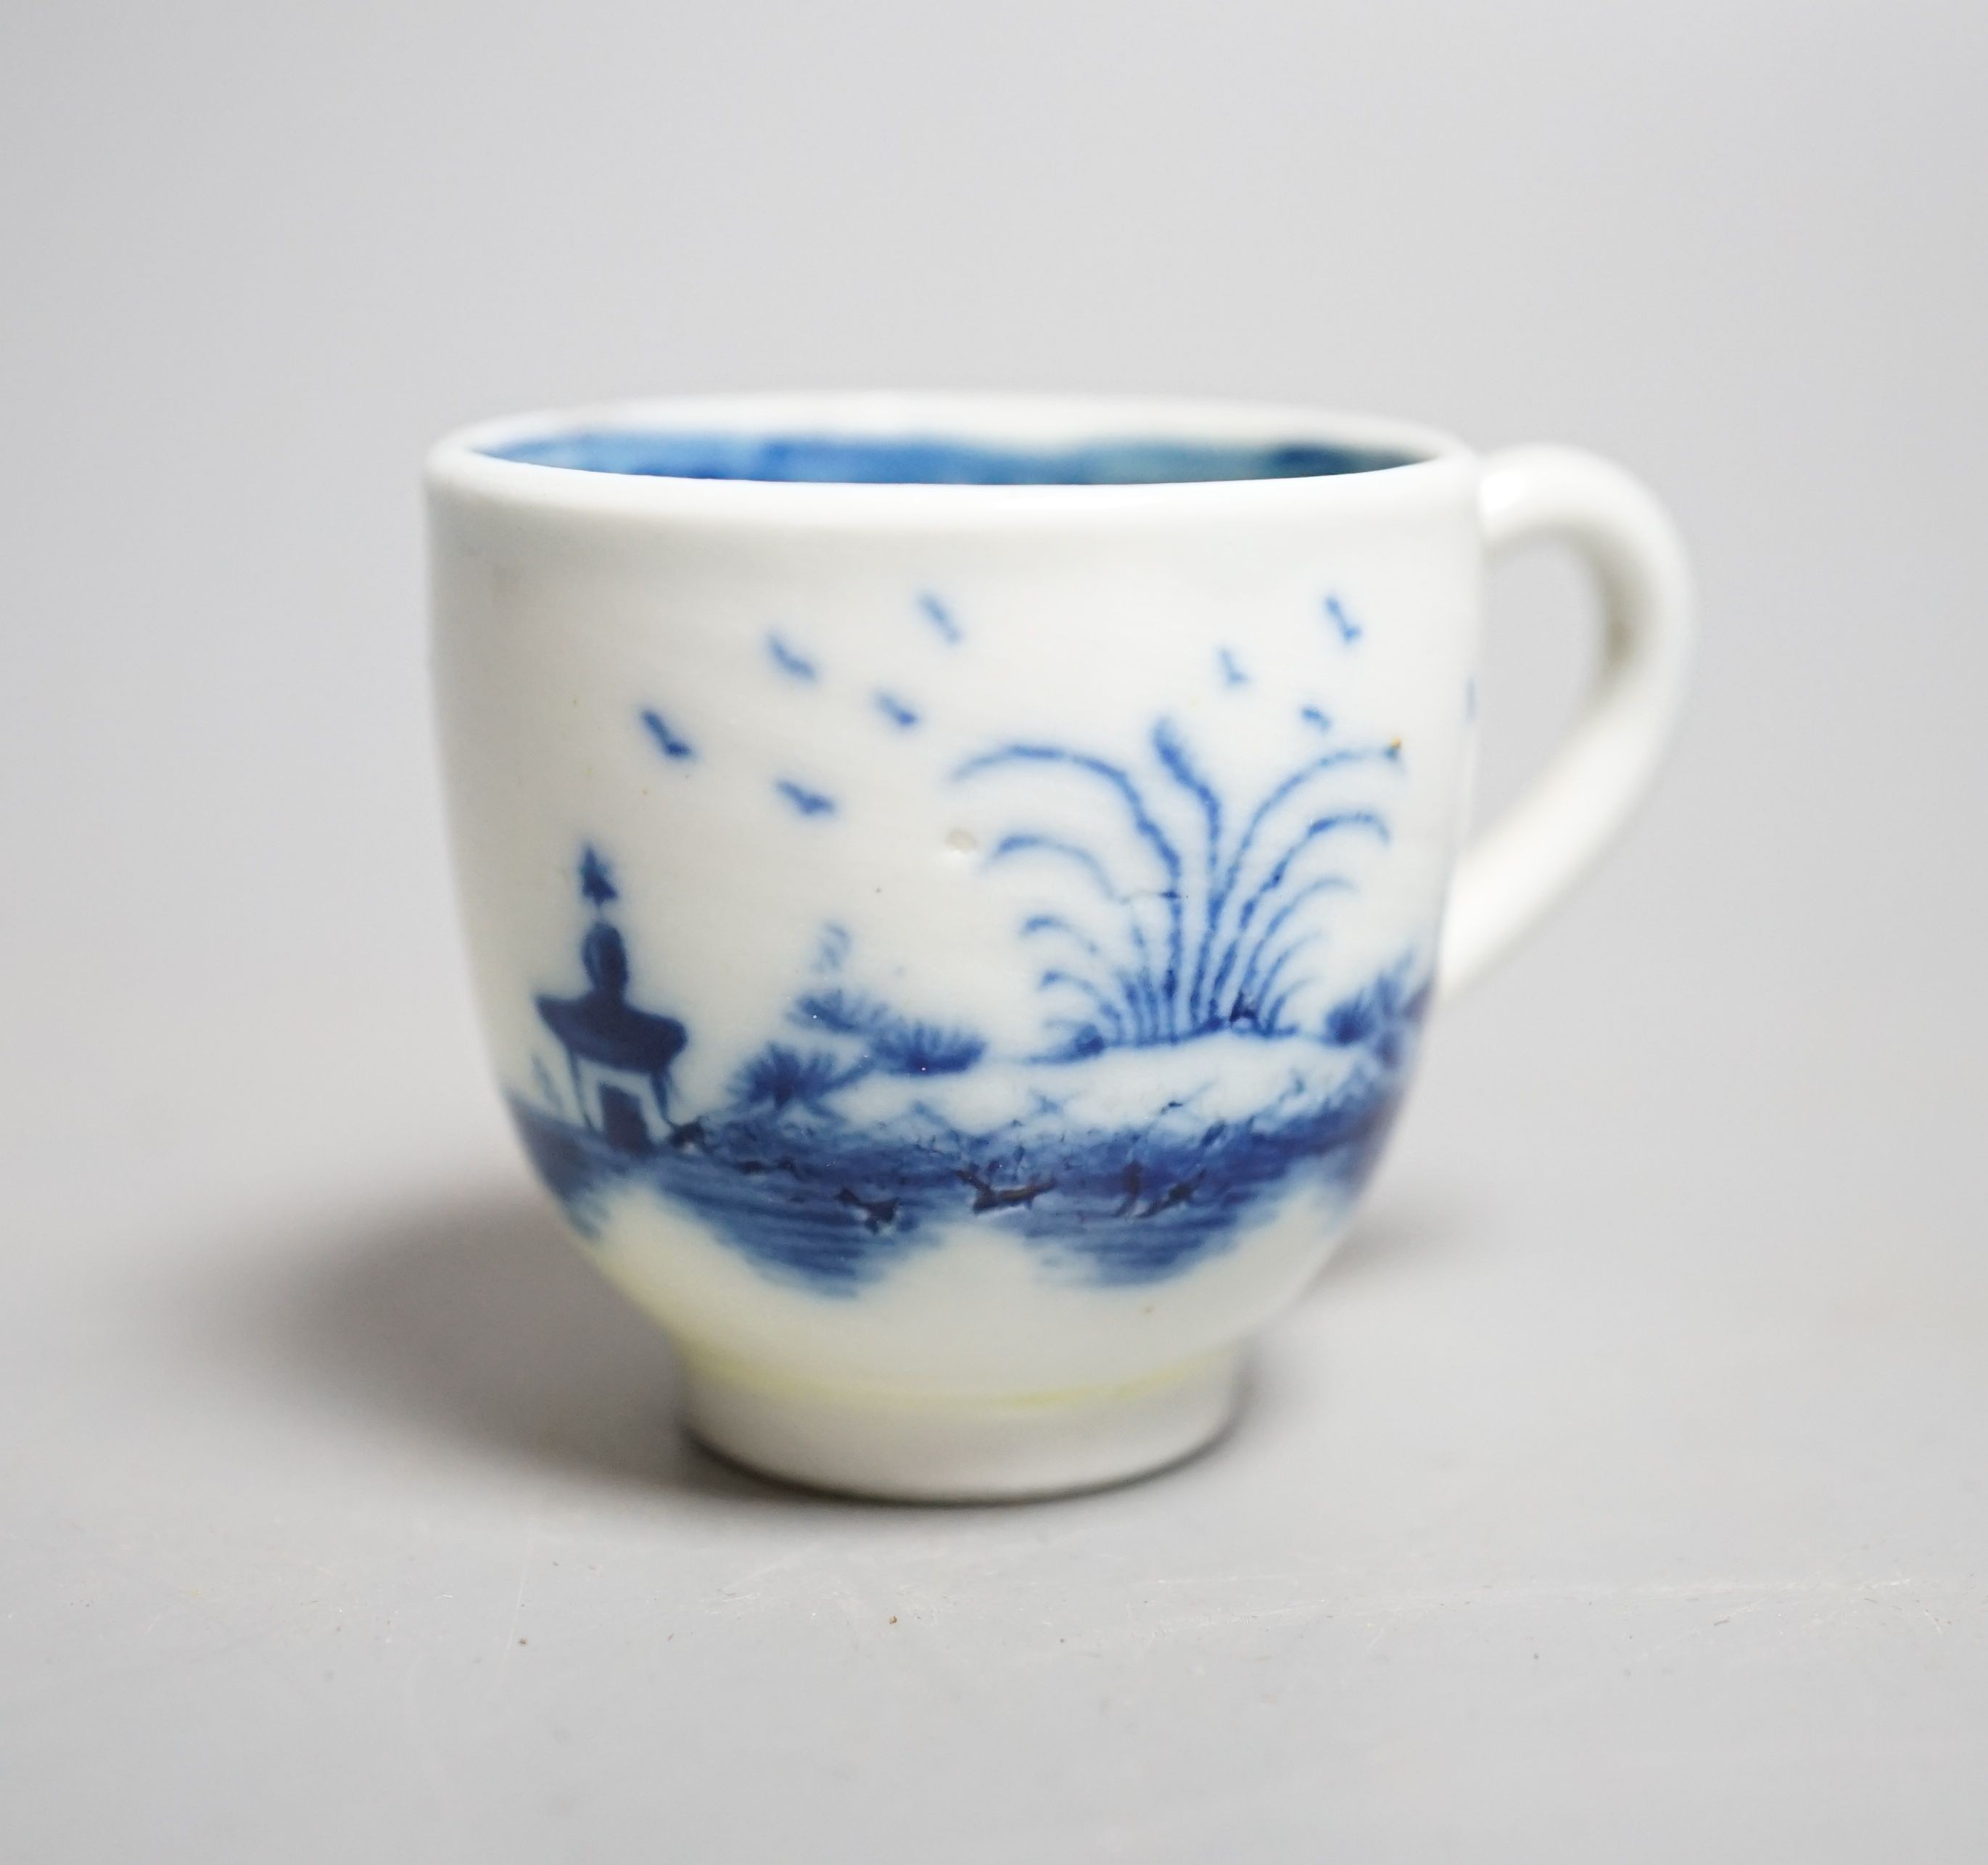 A Caughley 'The Island pattern' blue and white miniature cup, c.1780, 3.4cm. Provenance - Mona Sattin collection of miniature cups and saucers, collection no.16.